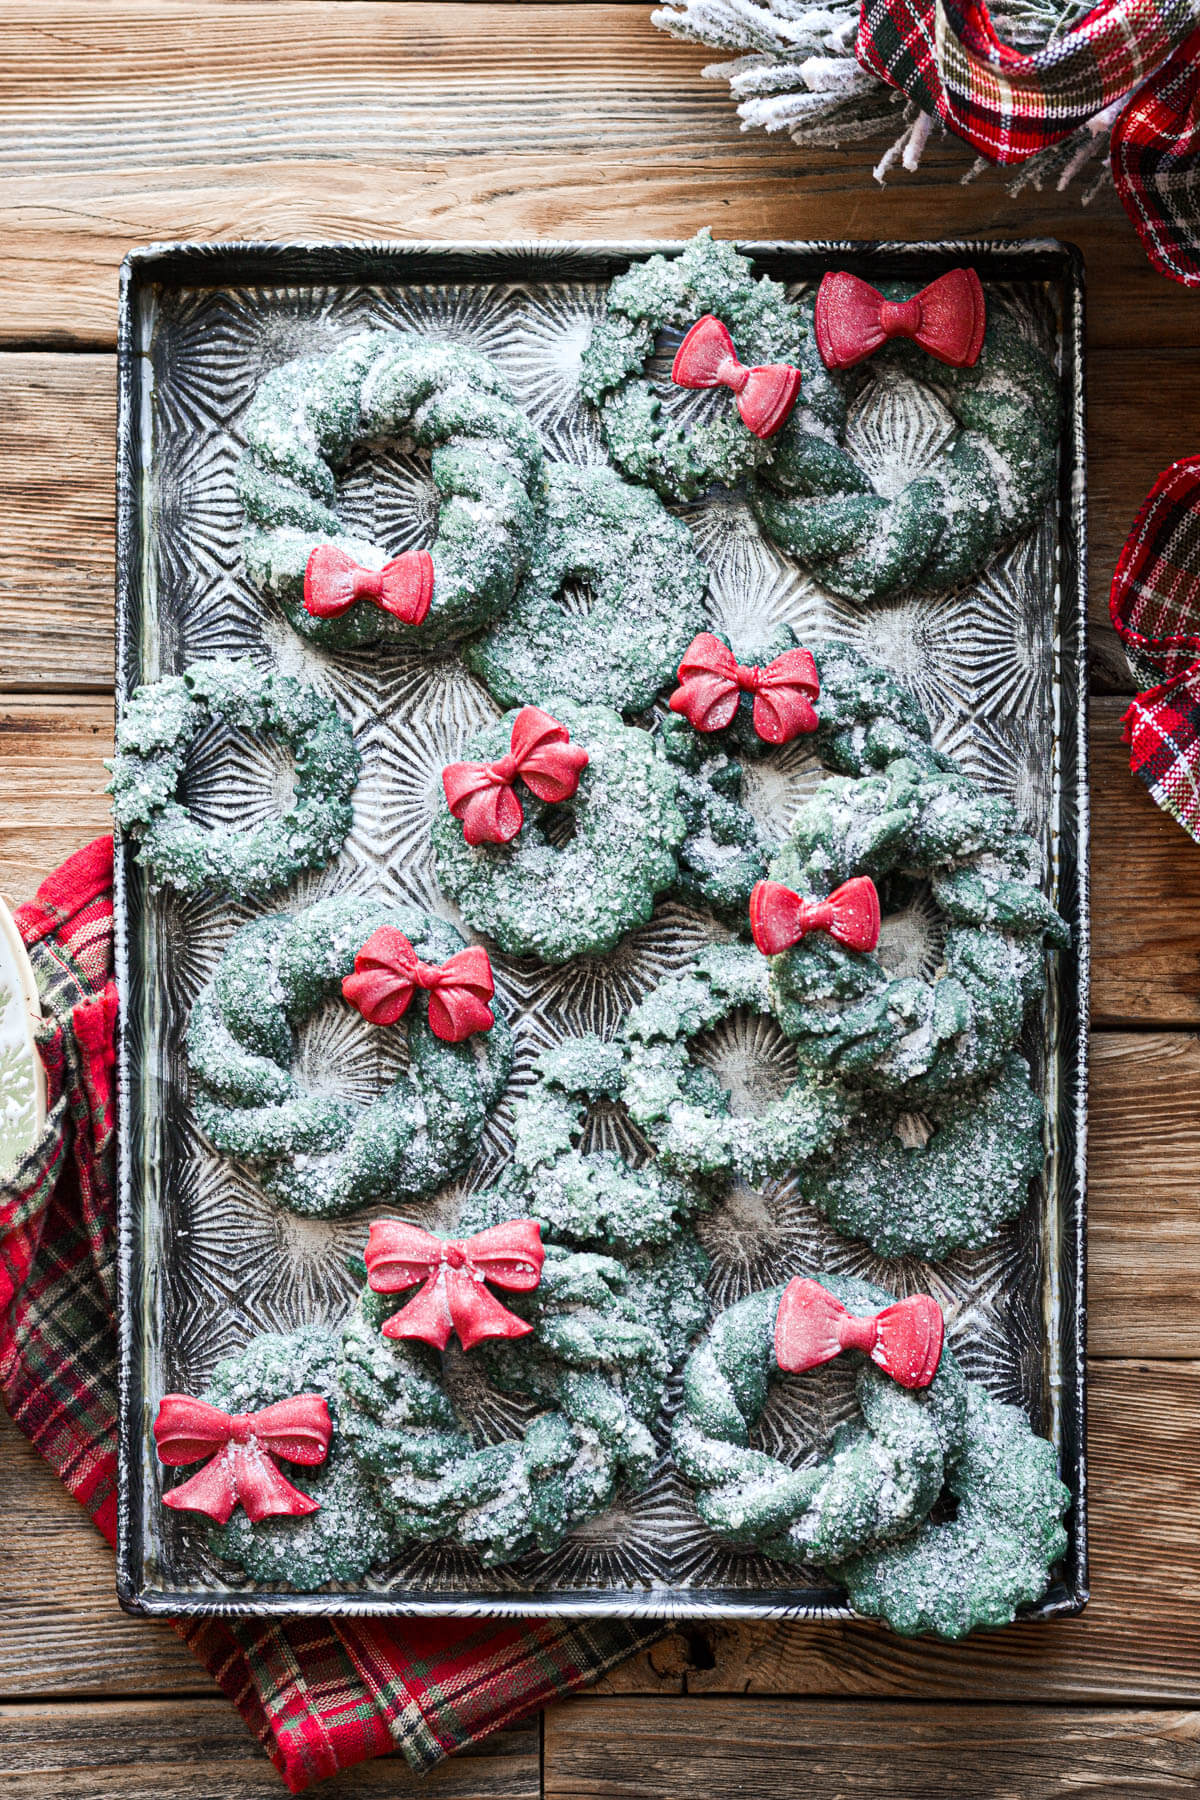 Christmas wreath cookies with red chocolate bows on a vintage baking sheet.